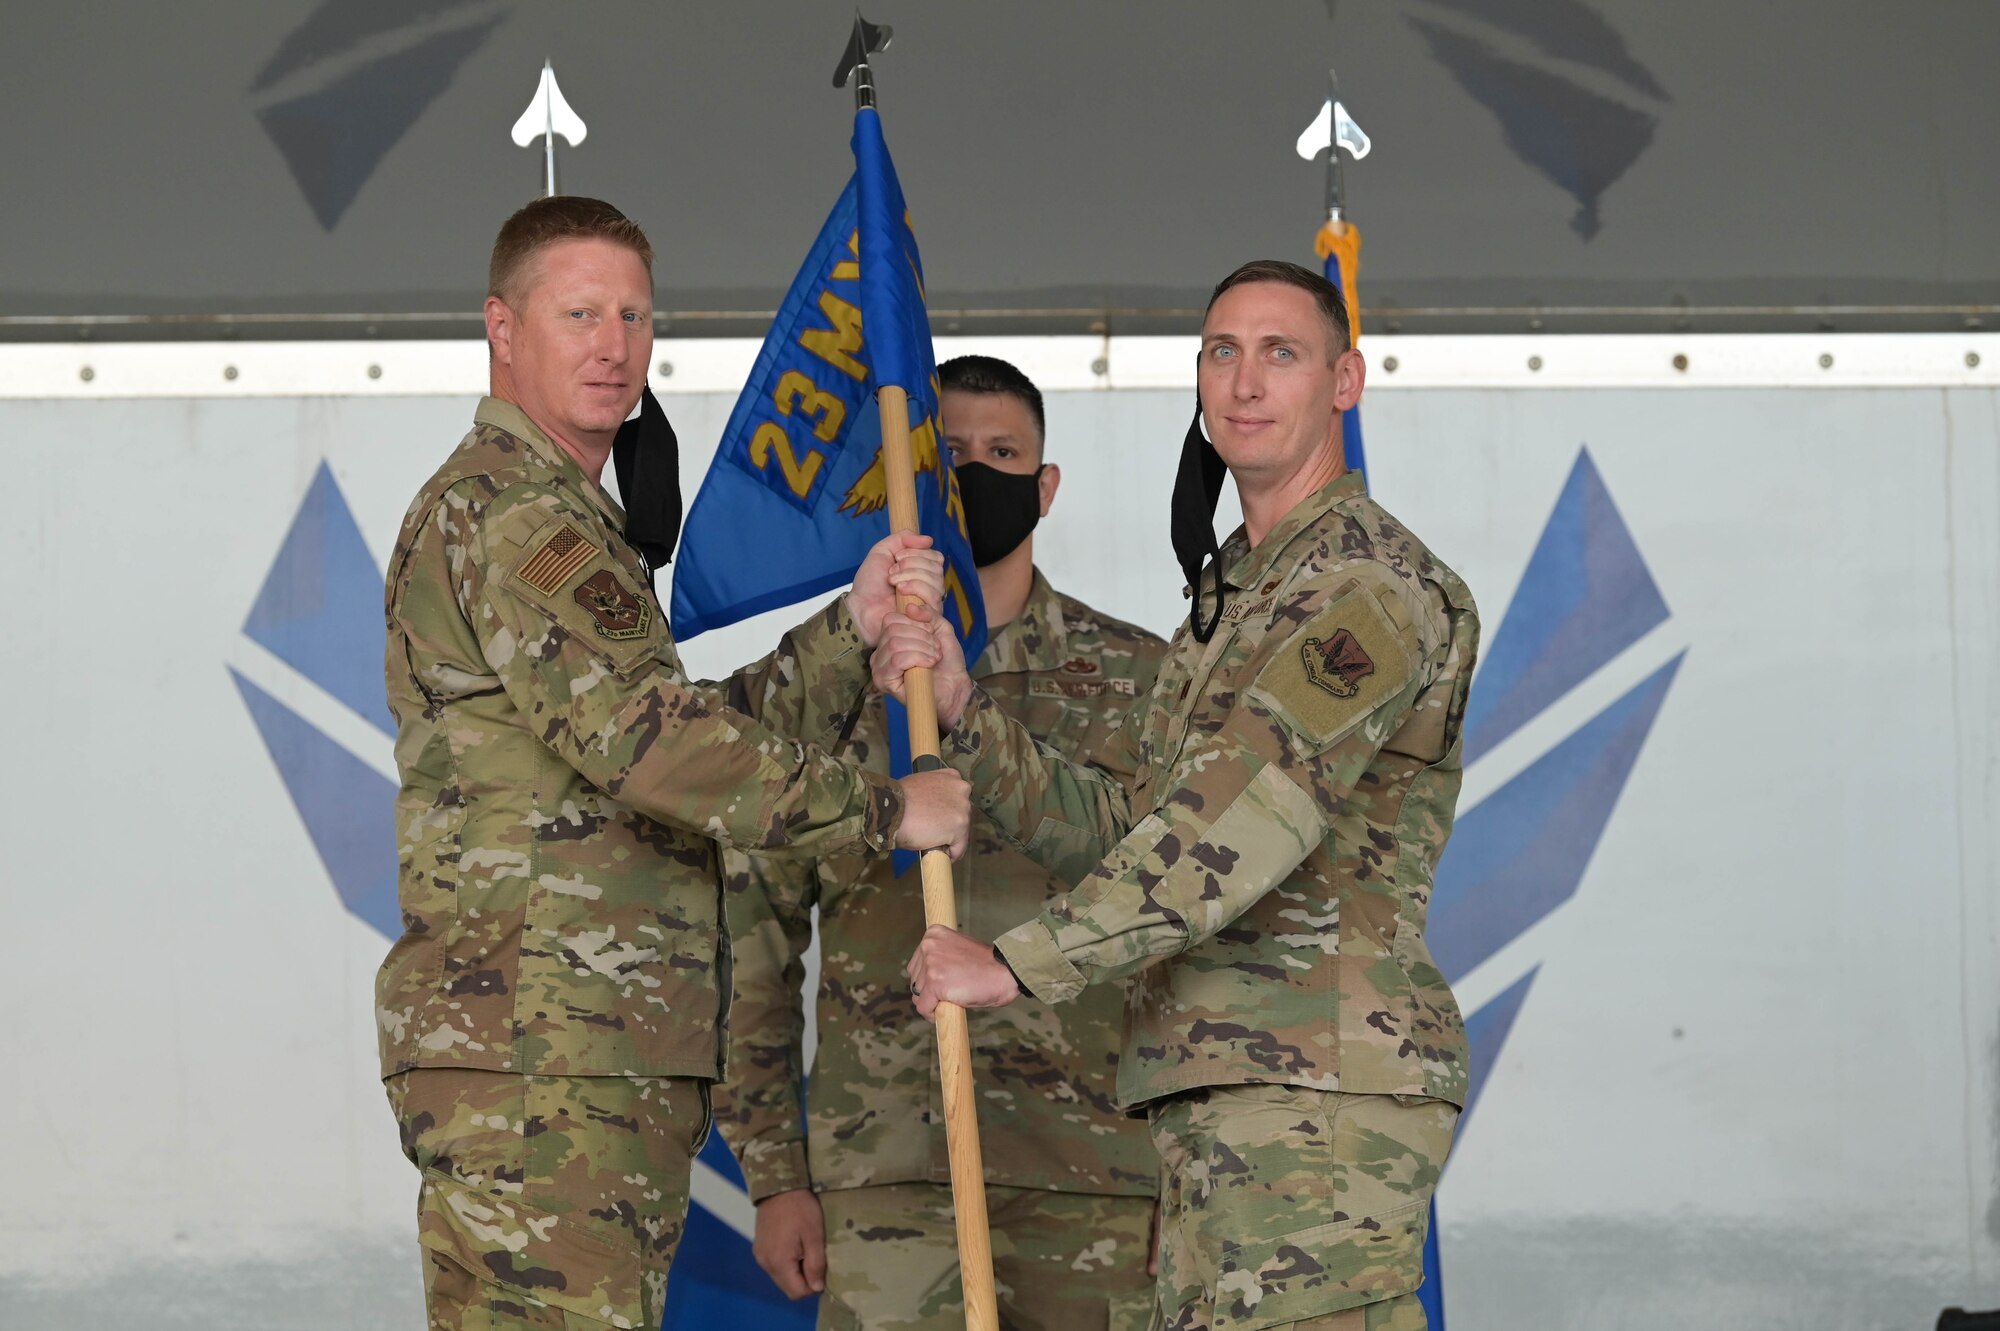 U.S. Air Force Col. Jason Purdy, 23rd Maintenance Group commander, left, passes the guide-on to U.S. Air Force Capt. Patrick Britton, 71st Rescue Generation Squadron commander, right, to assume command of the newly activated squadron at Moody Air Force Base, Georgia, Oct. 1, 2021. Combat search and rescue is a "can't-fail" mission, and it's imperative that the squadrons are ready to fly, fight and win. (U.S. Air Force photo by Senior Airman Rebeckah Medeiros)